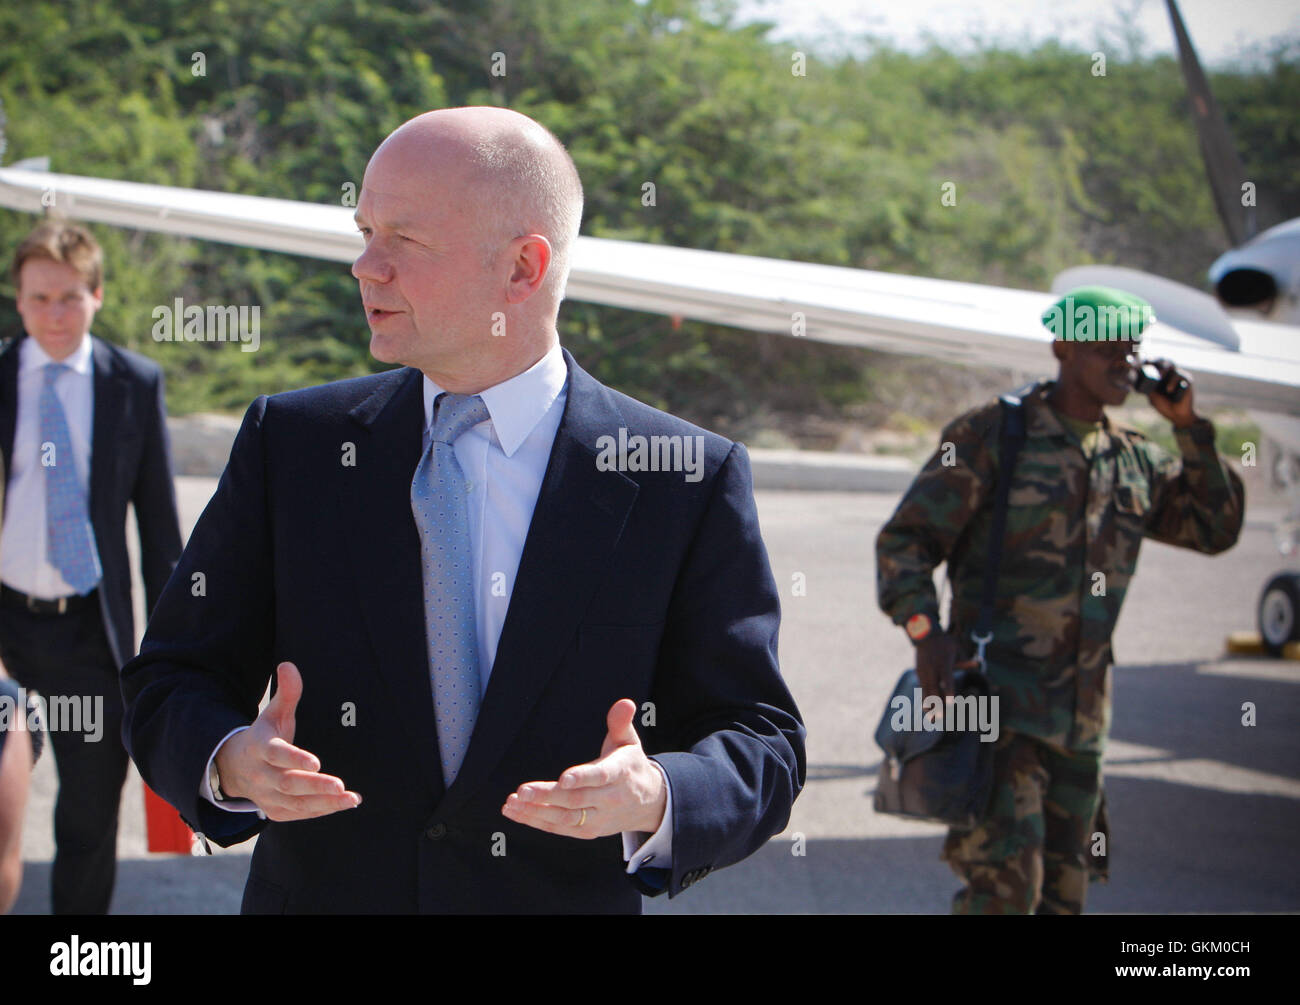 SOMALIA, Mogadishu: In a photograph released by the African Union-United Nations Information Support Team 2 February, British Foreign Secretary William Hague gestures after arriving at Mogadishu International Airport in the Somali capital. Hague was today the first British Foreign Secretary to set foot in Somalia for over 20 years, where he met with the leadership of the African Union Mission in Somalia (AMISOM) and the president of the Somali Transitional Federal Government (TFG) Sheik Sharif Sheik Ahmed, and formally introducing the credentials of the UK's new ambassador to the country, Mark Stock Photo